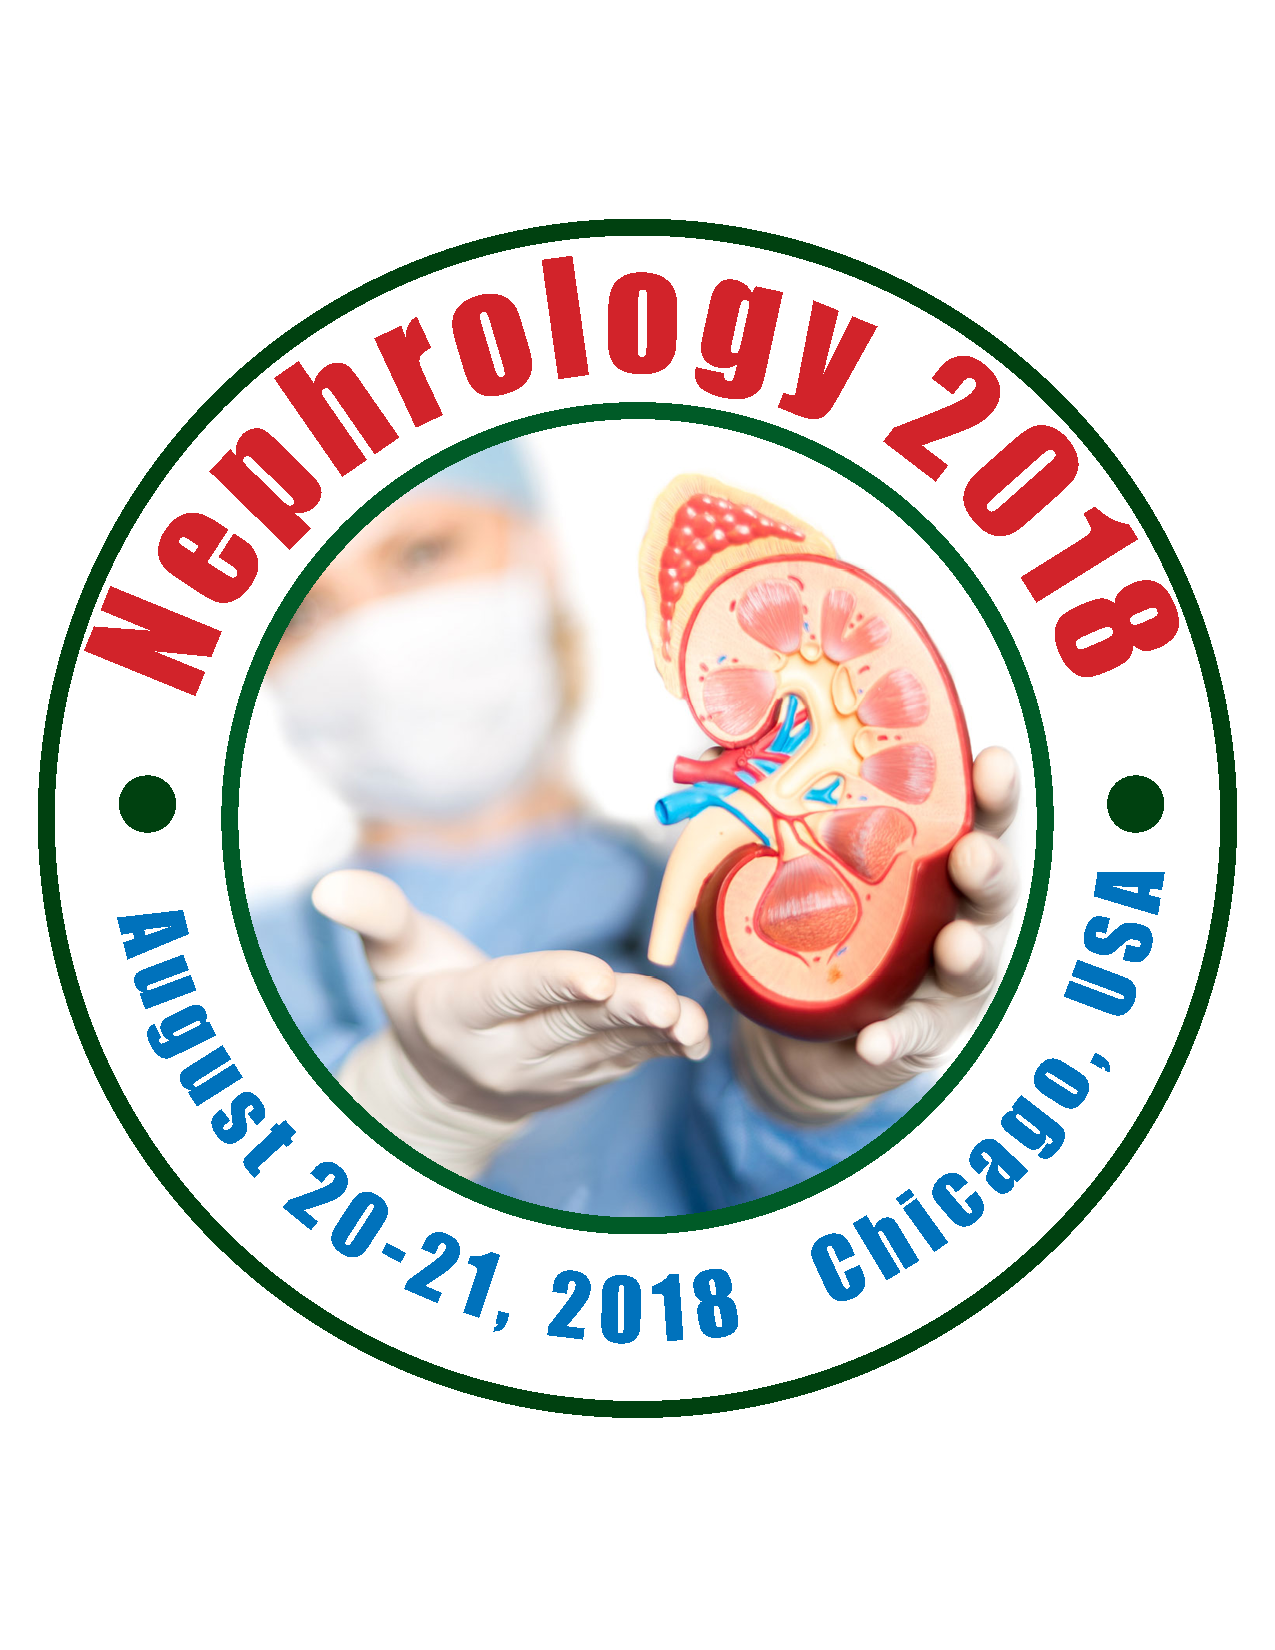 Photos of Annual Conference on Nephrology & Urology